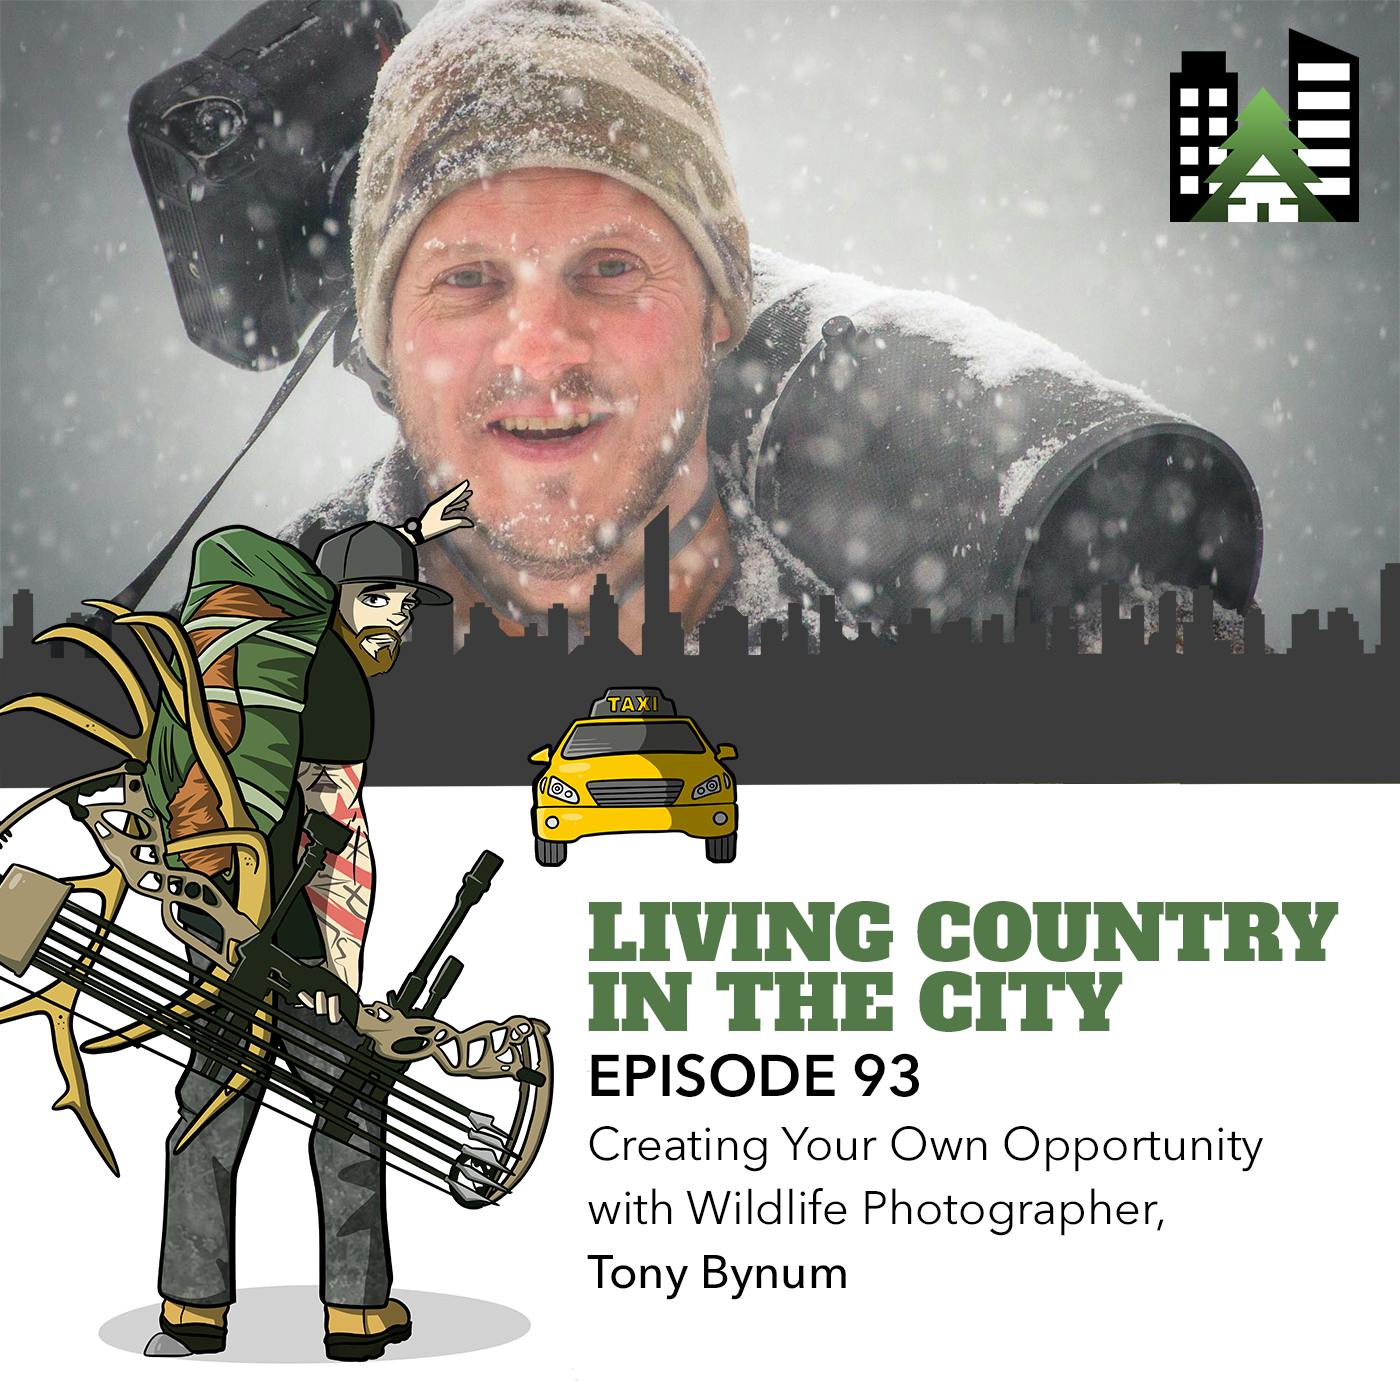 Ep 93 - Creating Your Own Opportunity with Wildlife Photographer, Tony Bynum